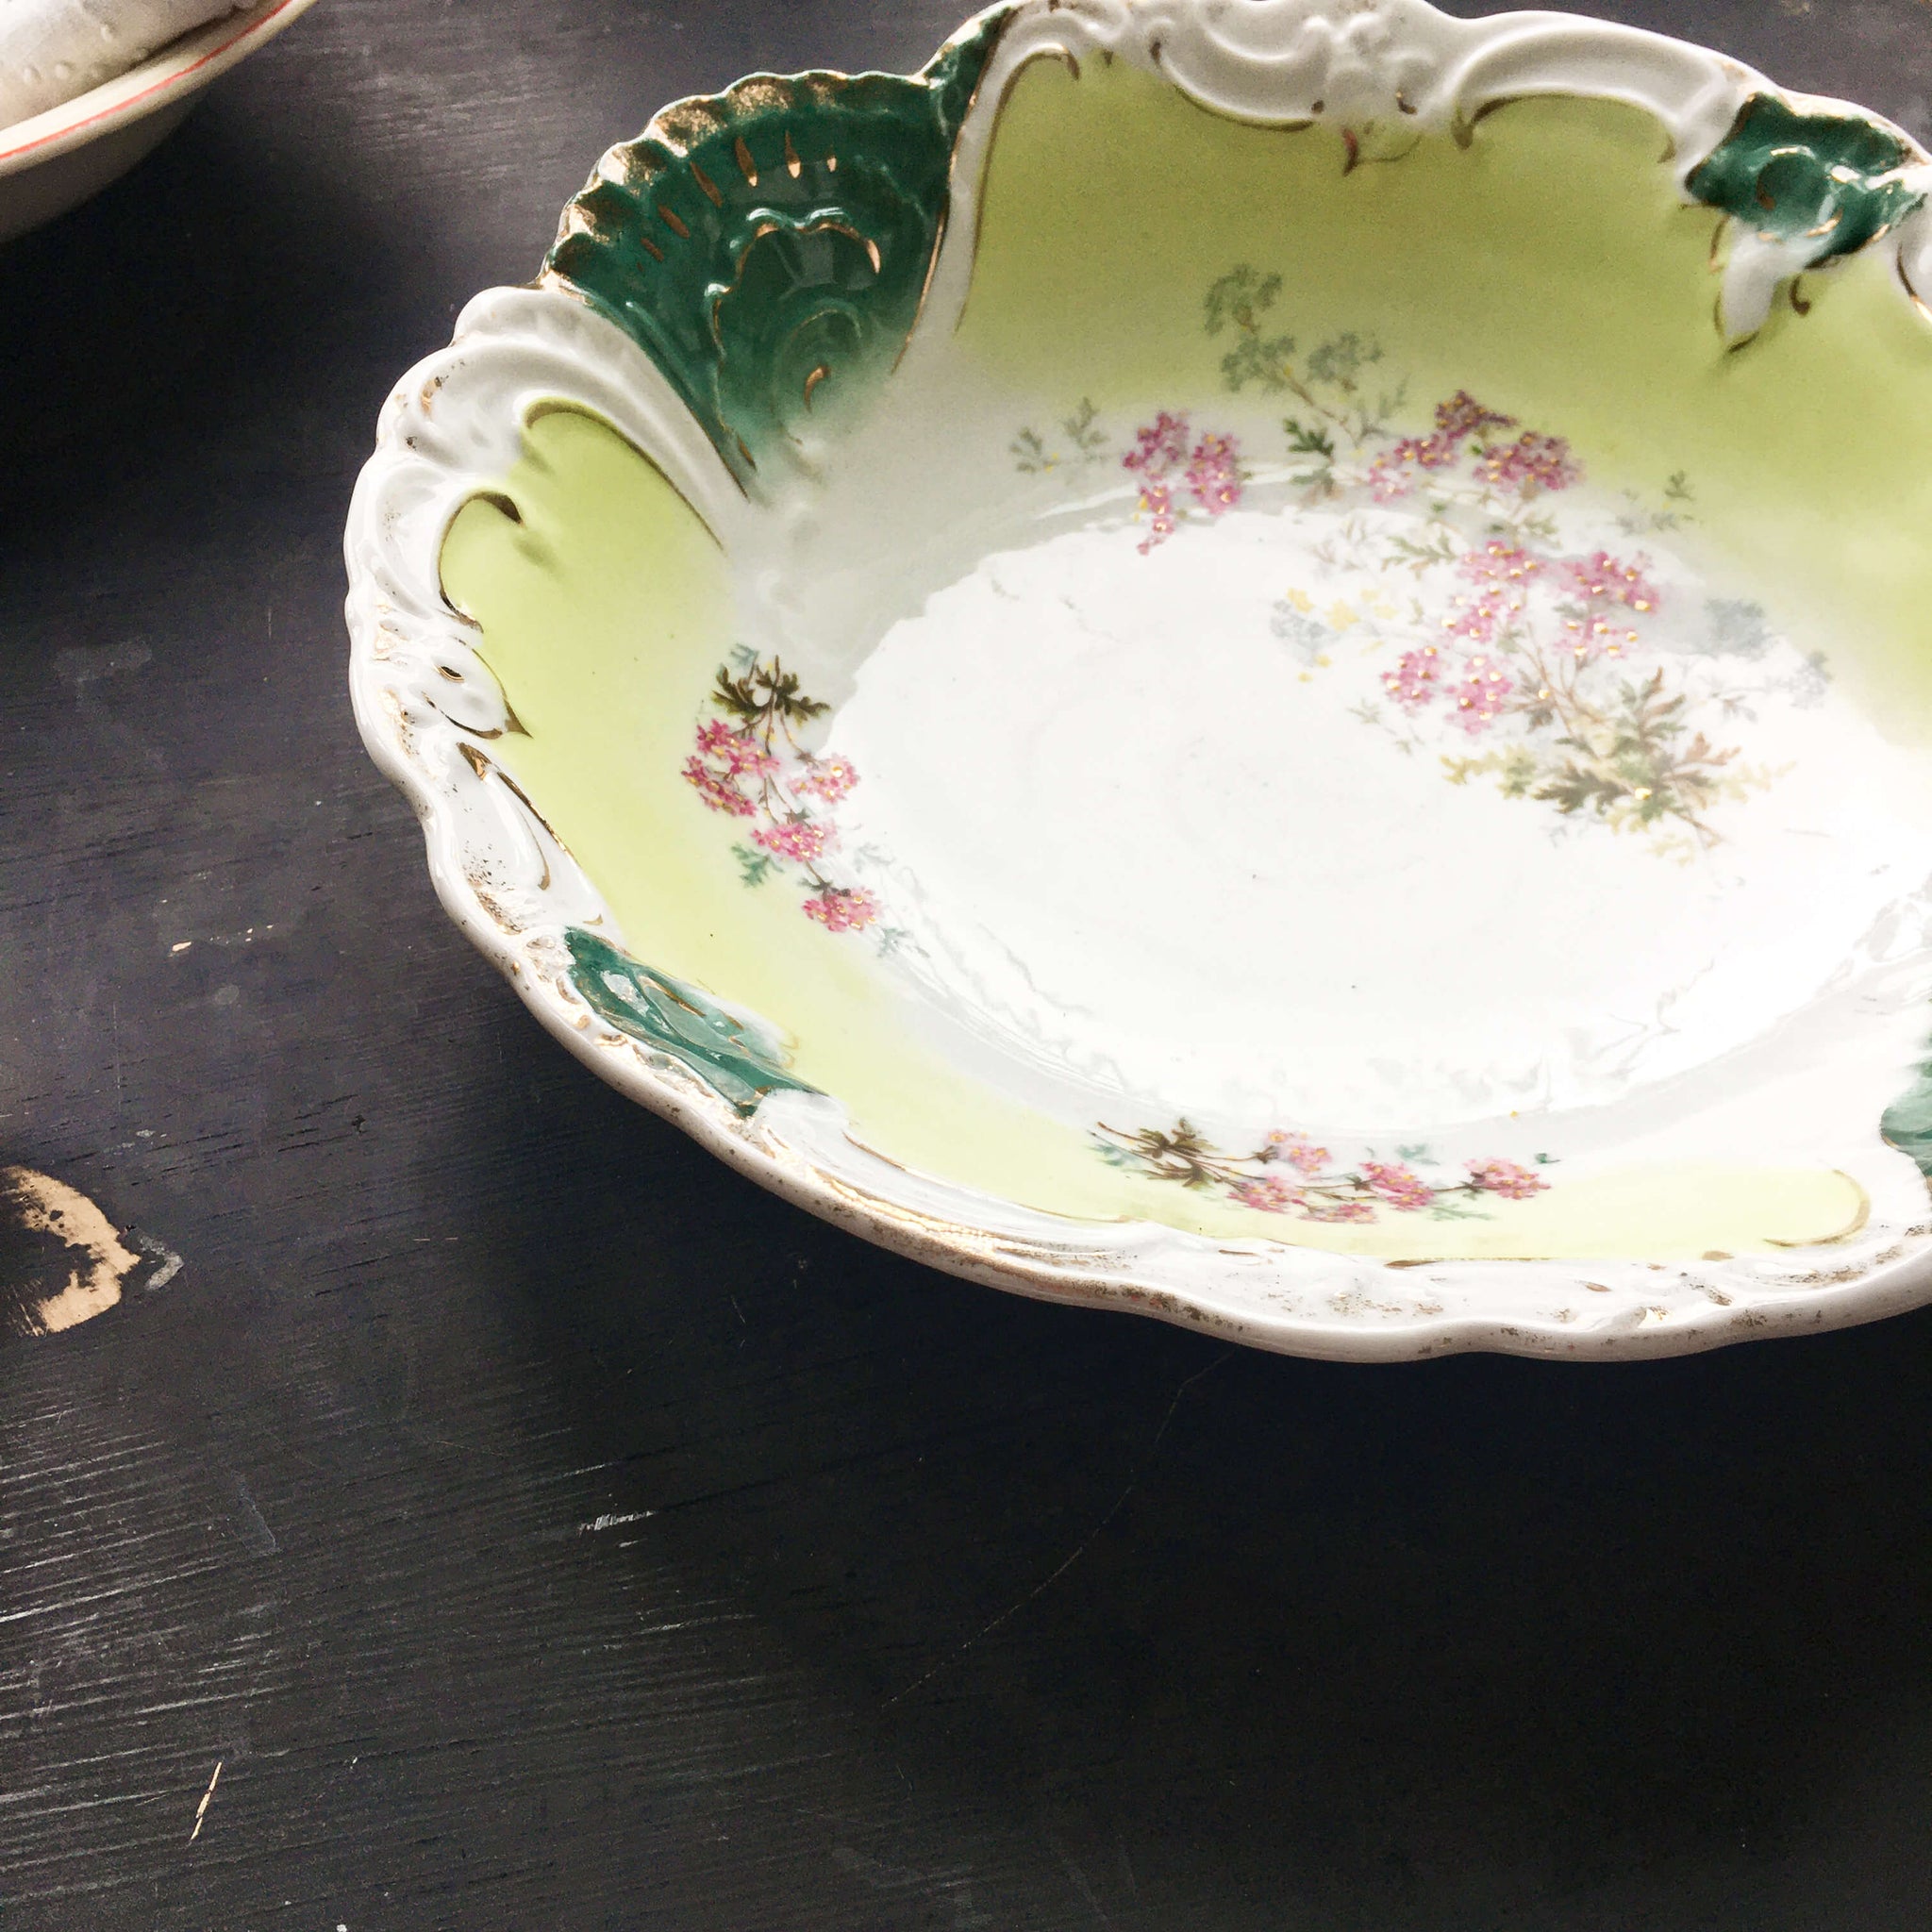 Antique Green and White Porcelain Bowl with Pink Flowers Gold Accents and Embossed Details